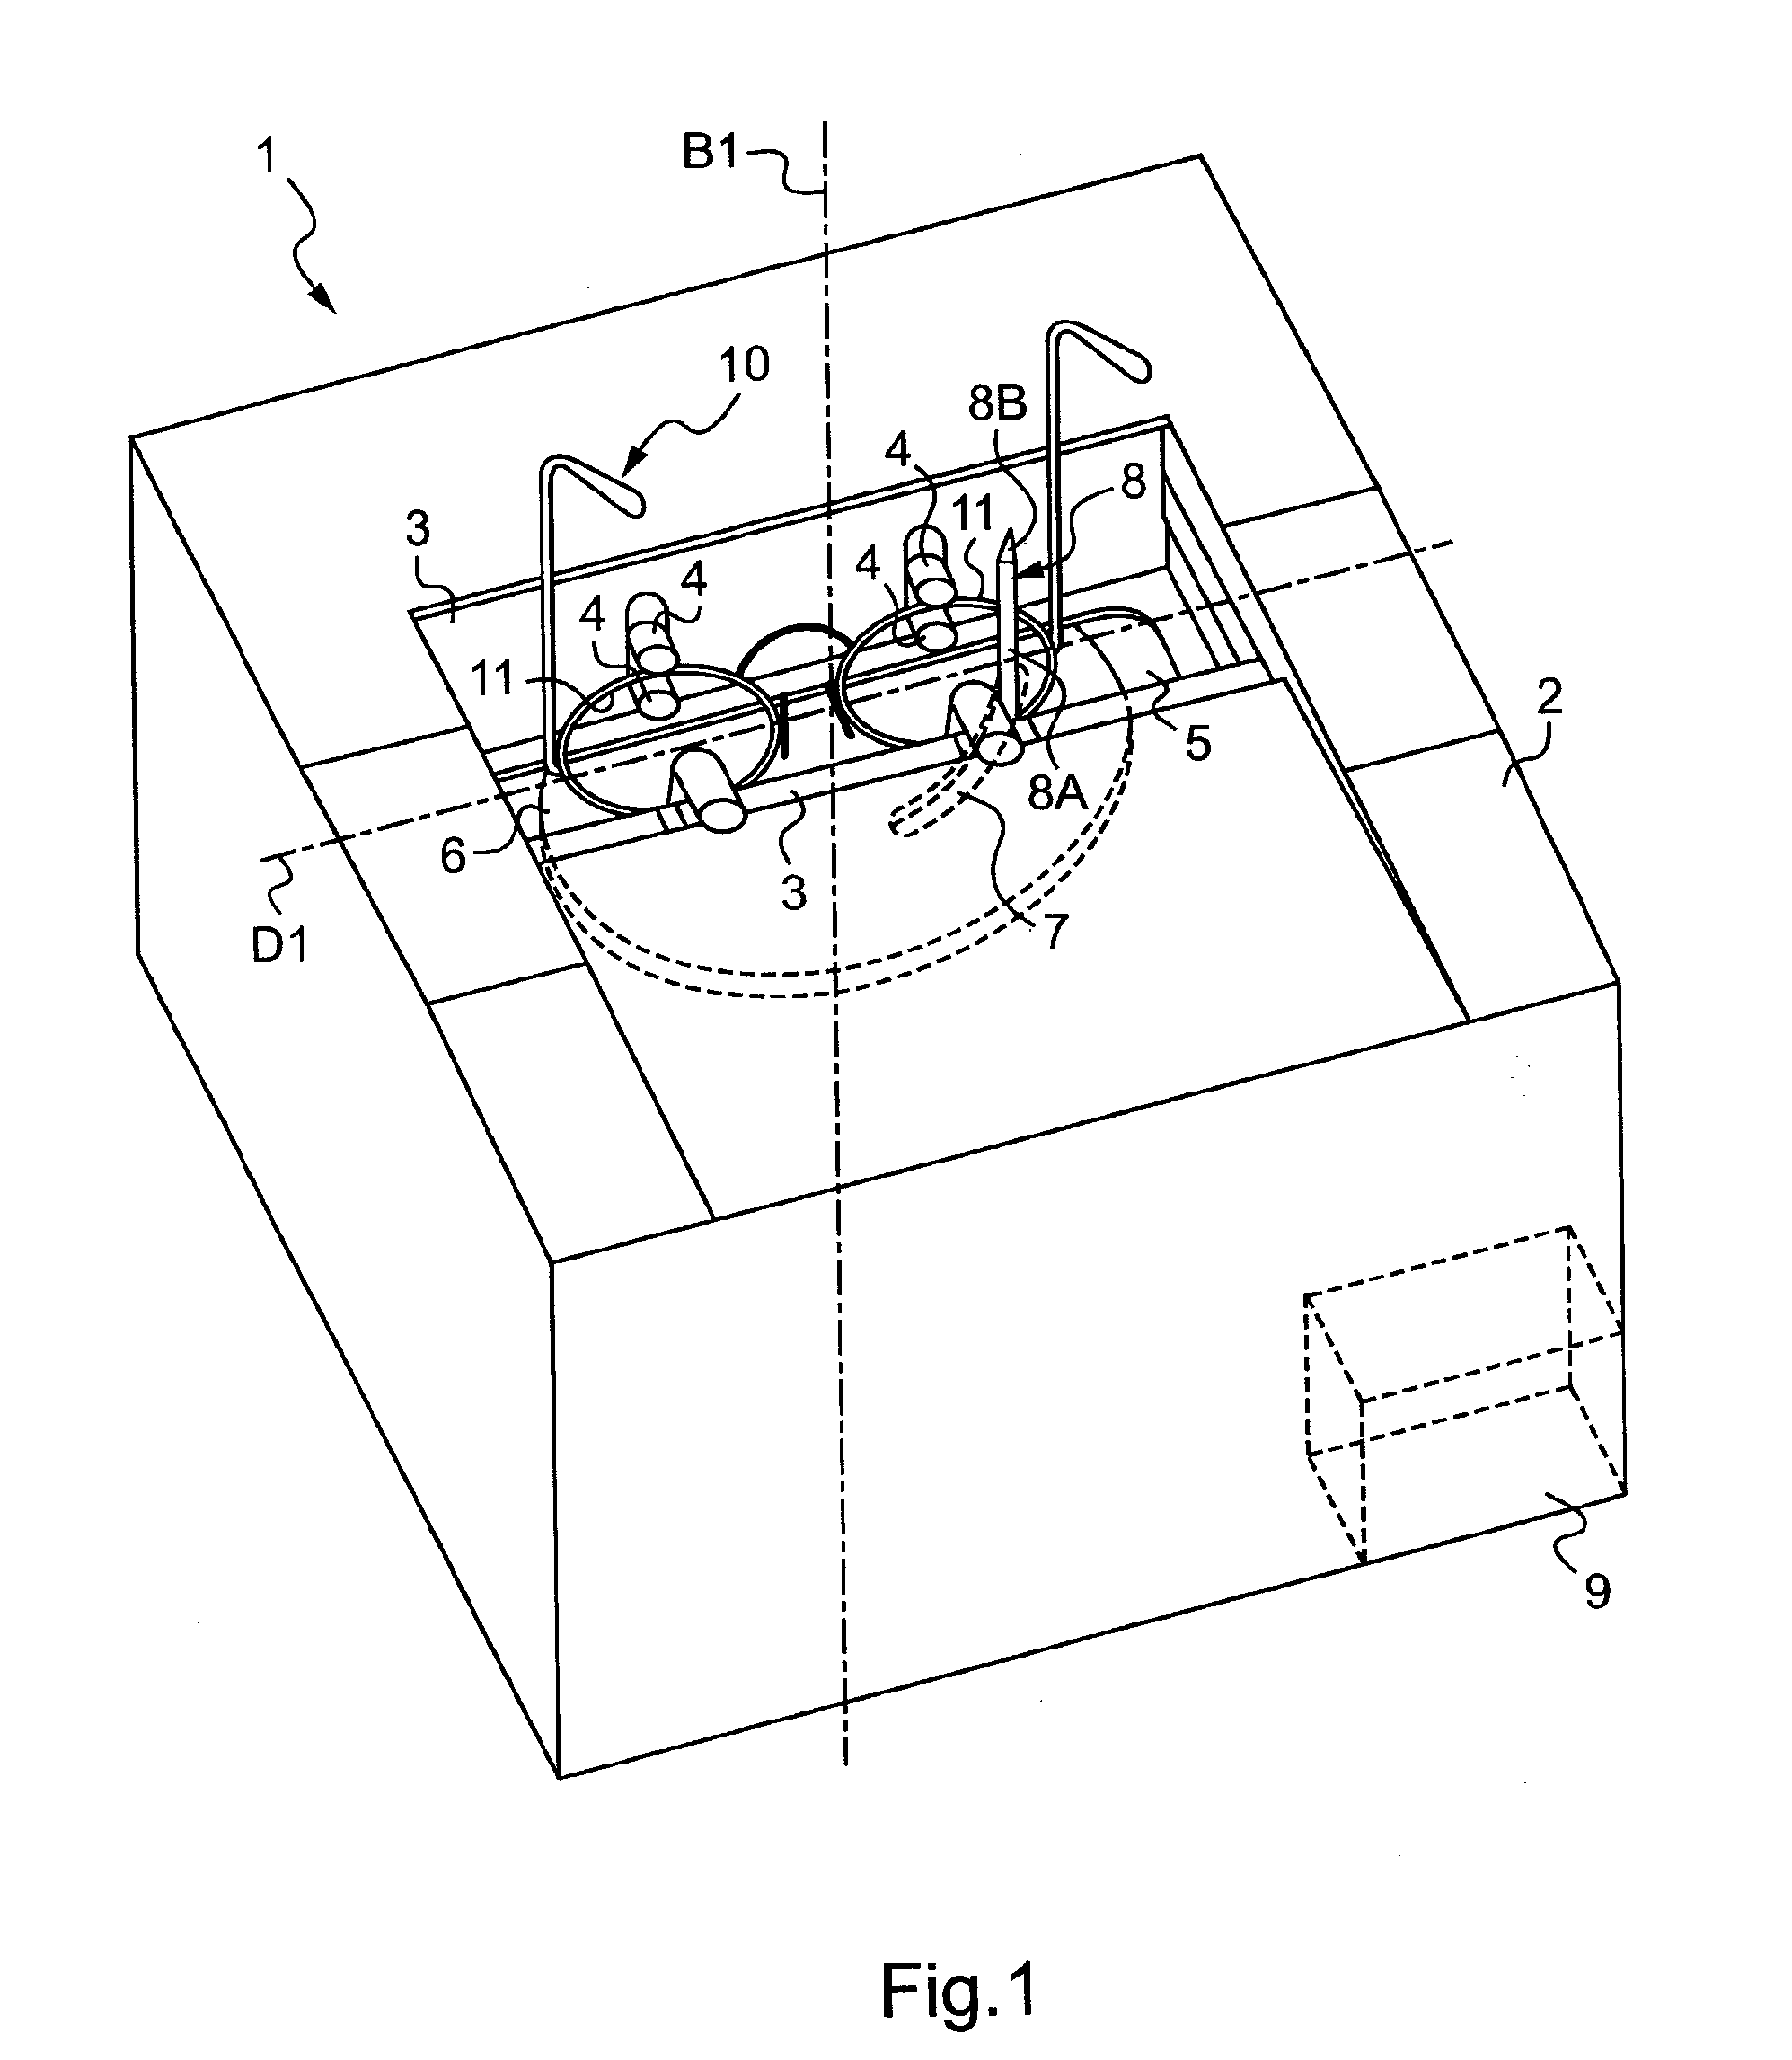 Method of preparing an ophthalmic lens with special machining of its engagement ridge